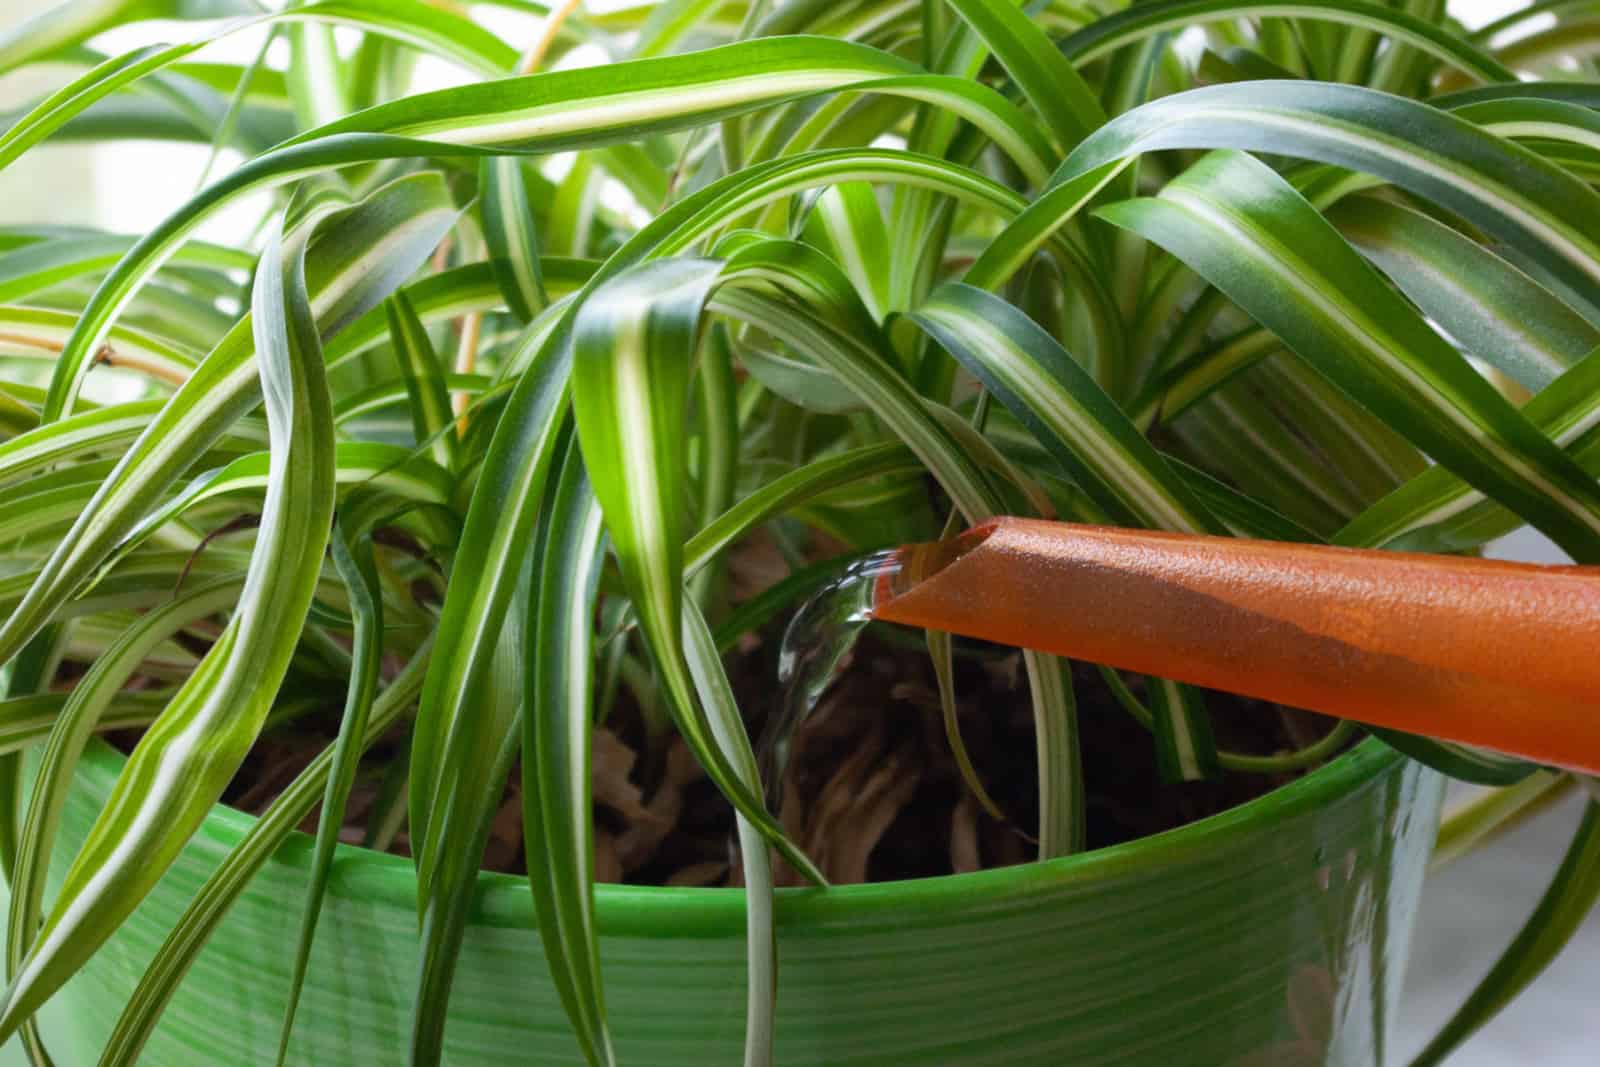 watering a plant indoors